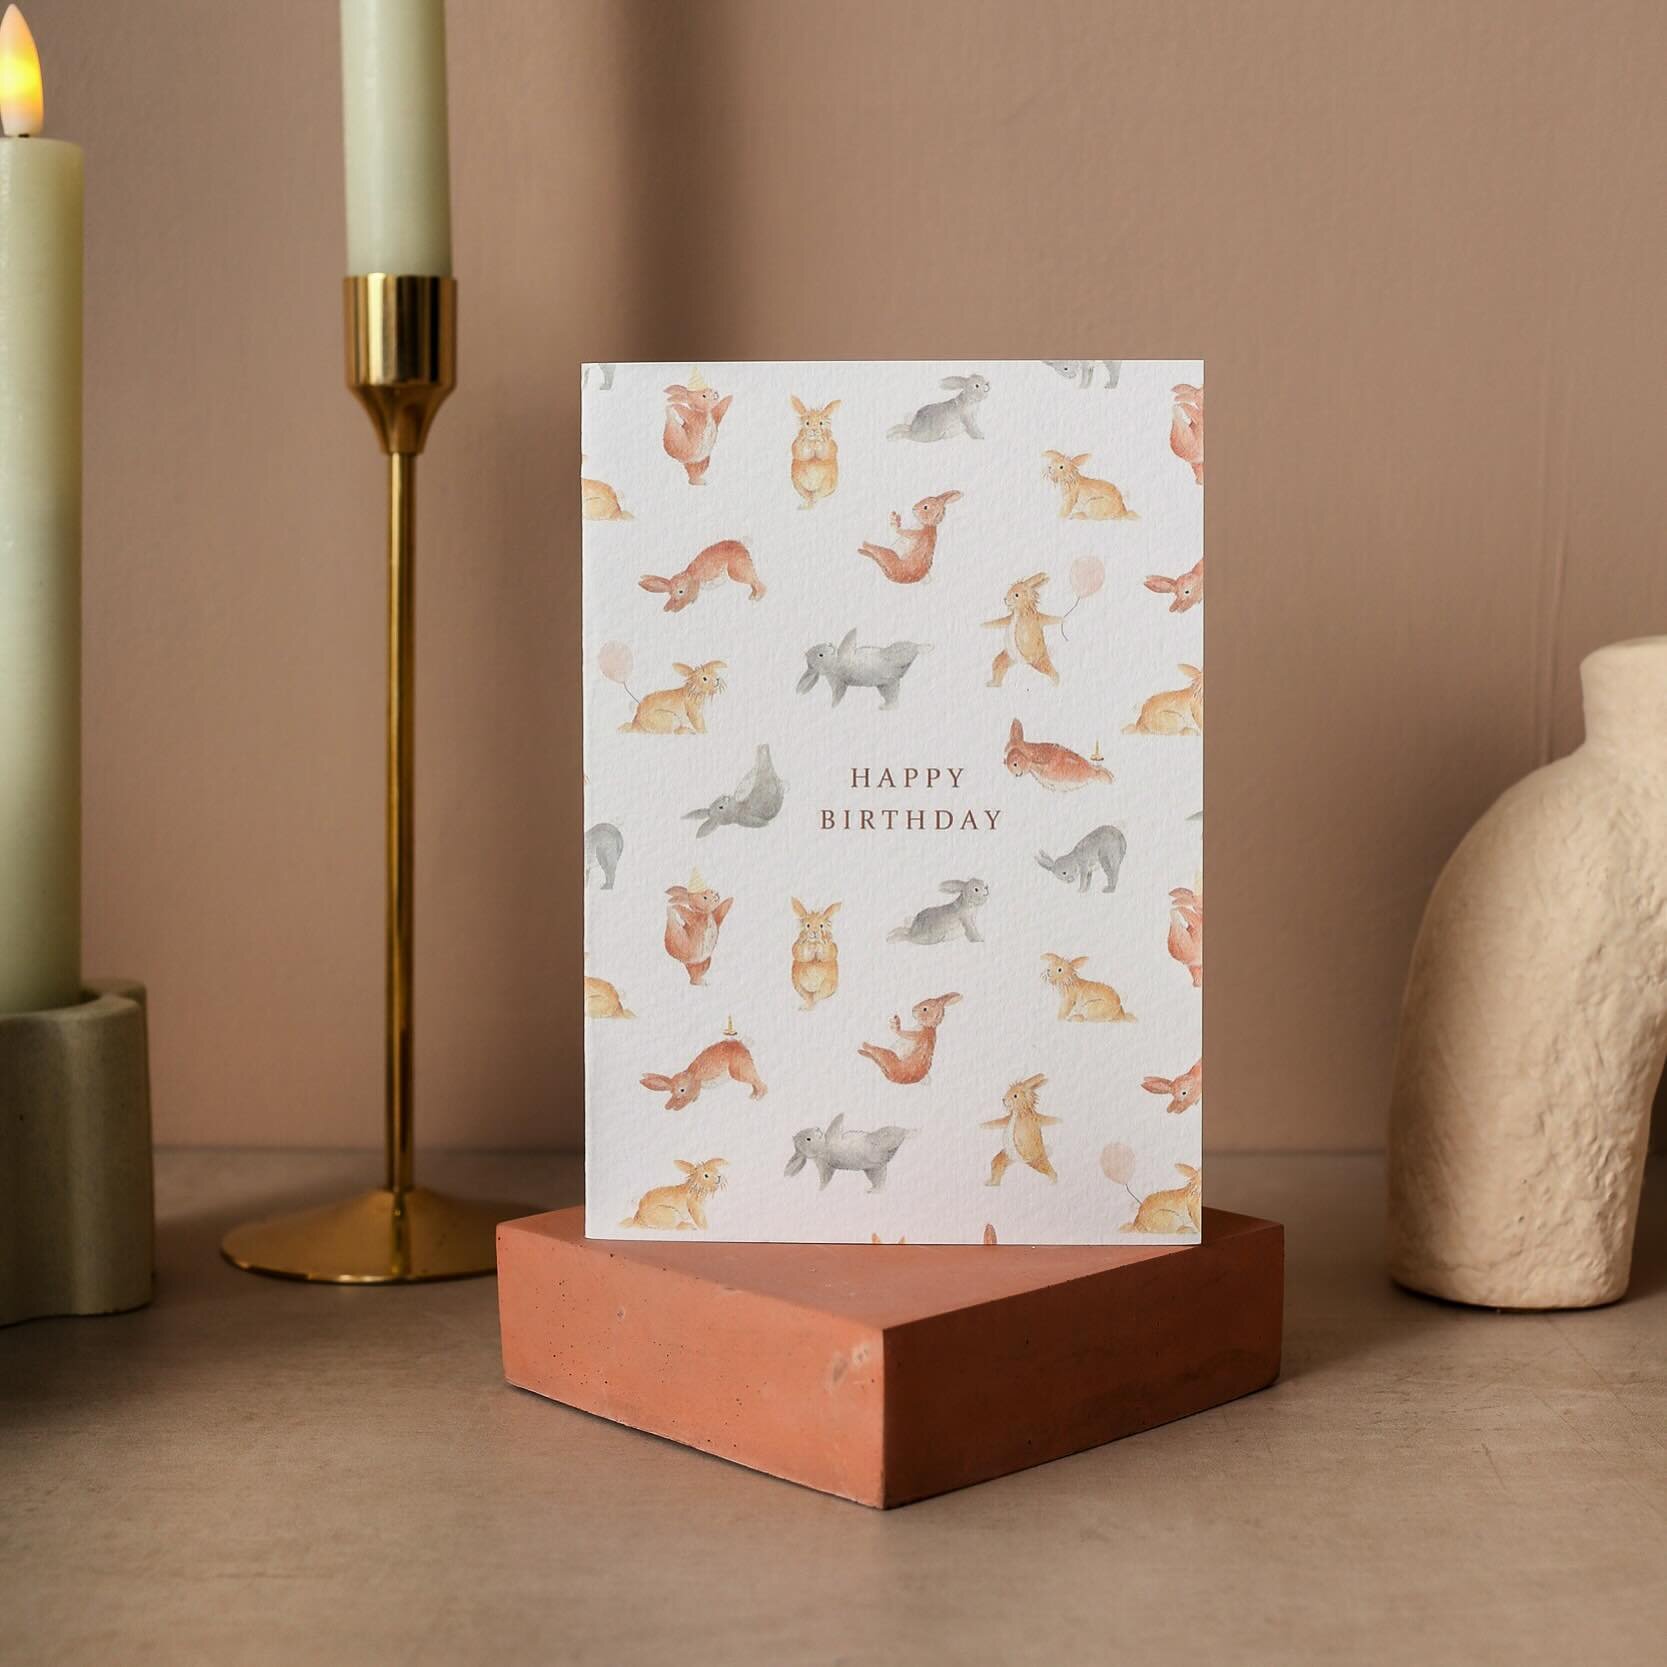 I don&rsquo;t know about you but this is the kind of birthday party I&rsquo;d want to go to. 

The party bunny birthday card (tongue twister much) is one of 10 new cards being released next week, encouraging movement and perfect for all the yoga, pil